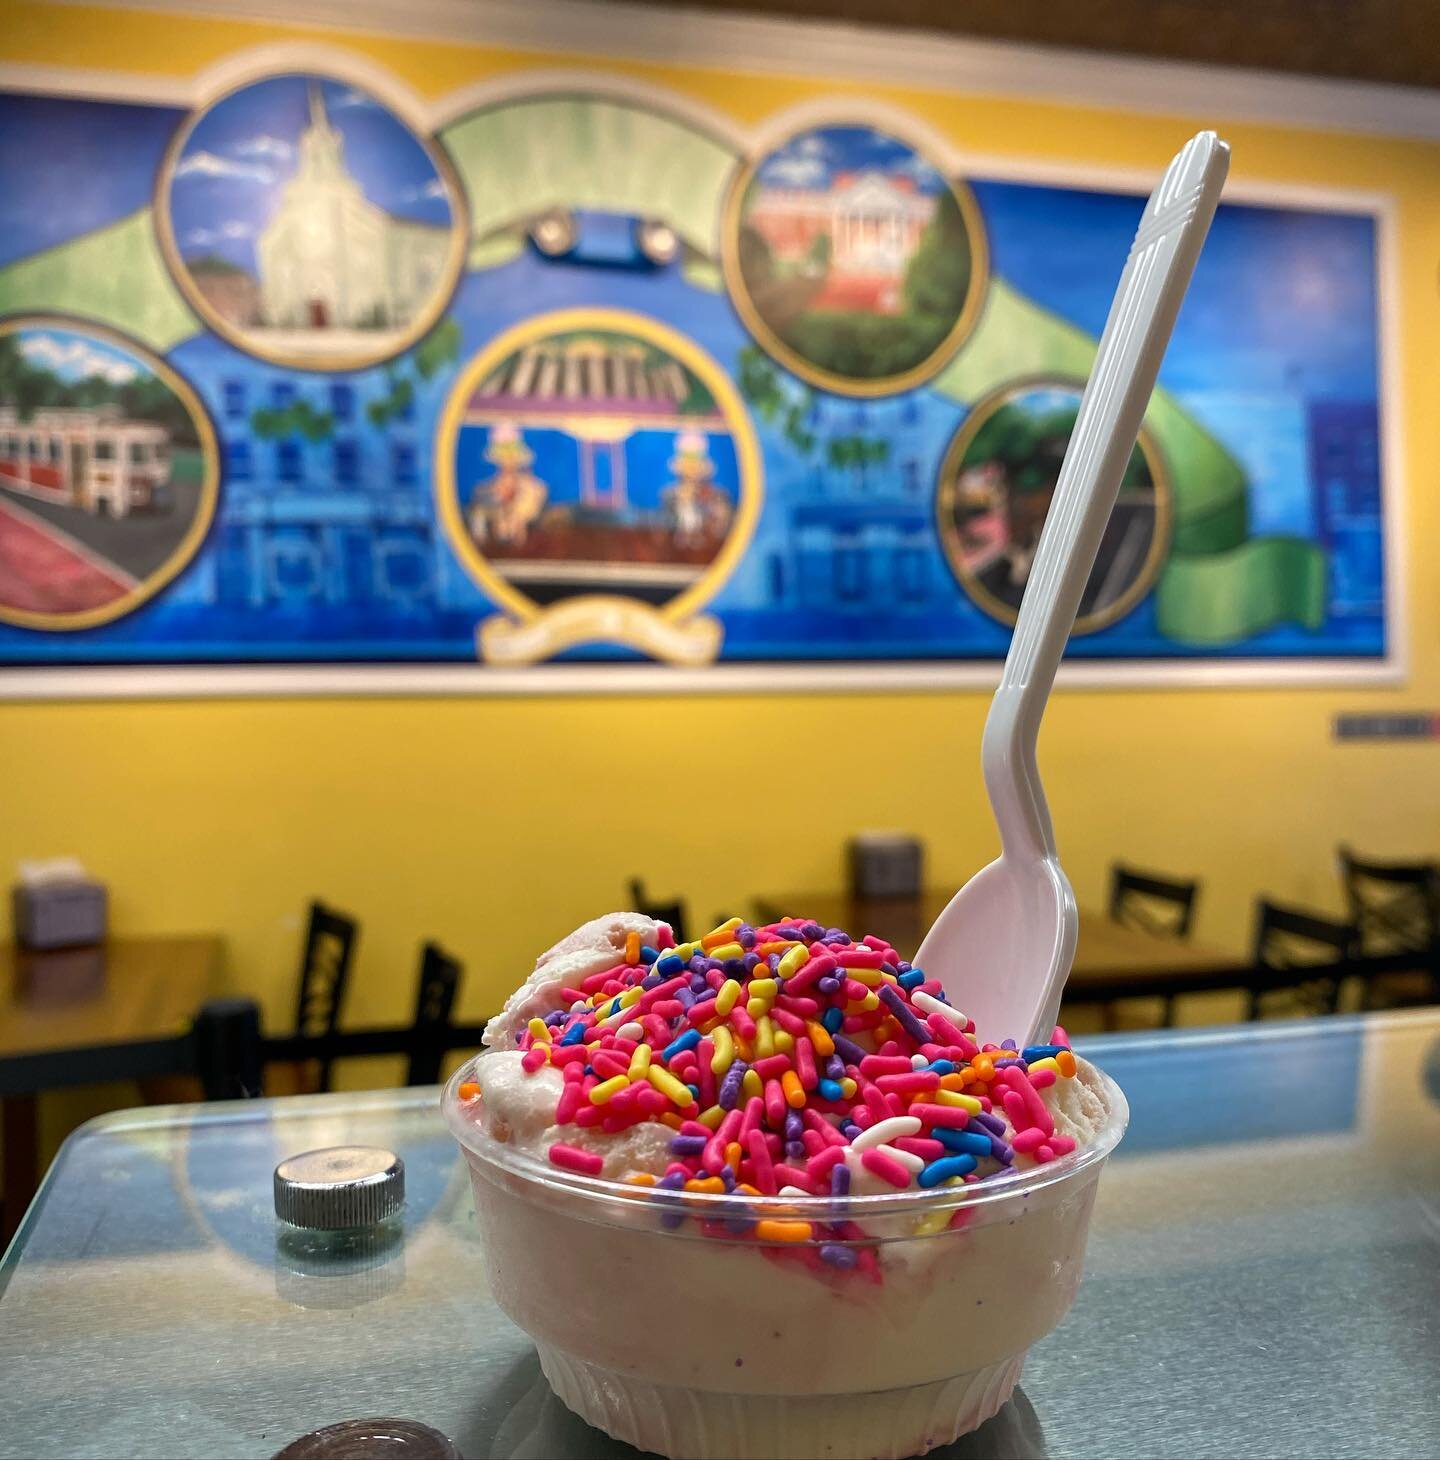 Happy Monday! Do you call this topping sprinkles or jimmie&rsquo;s? We want to know! Comment below ⬇️

#fredericksburg #goodeats #icecream #abnerb #hotcoca #fxbg #coffee #carolinestreet #staffordeats #staffordcounty #shopsmall #smallbusiness #mainstr